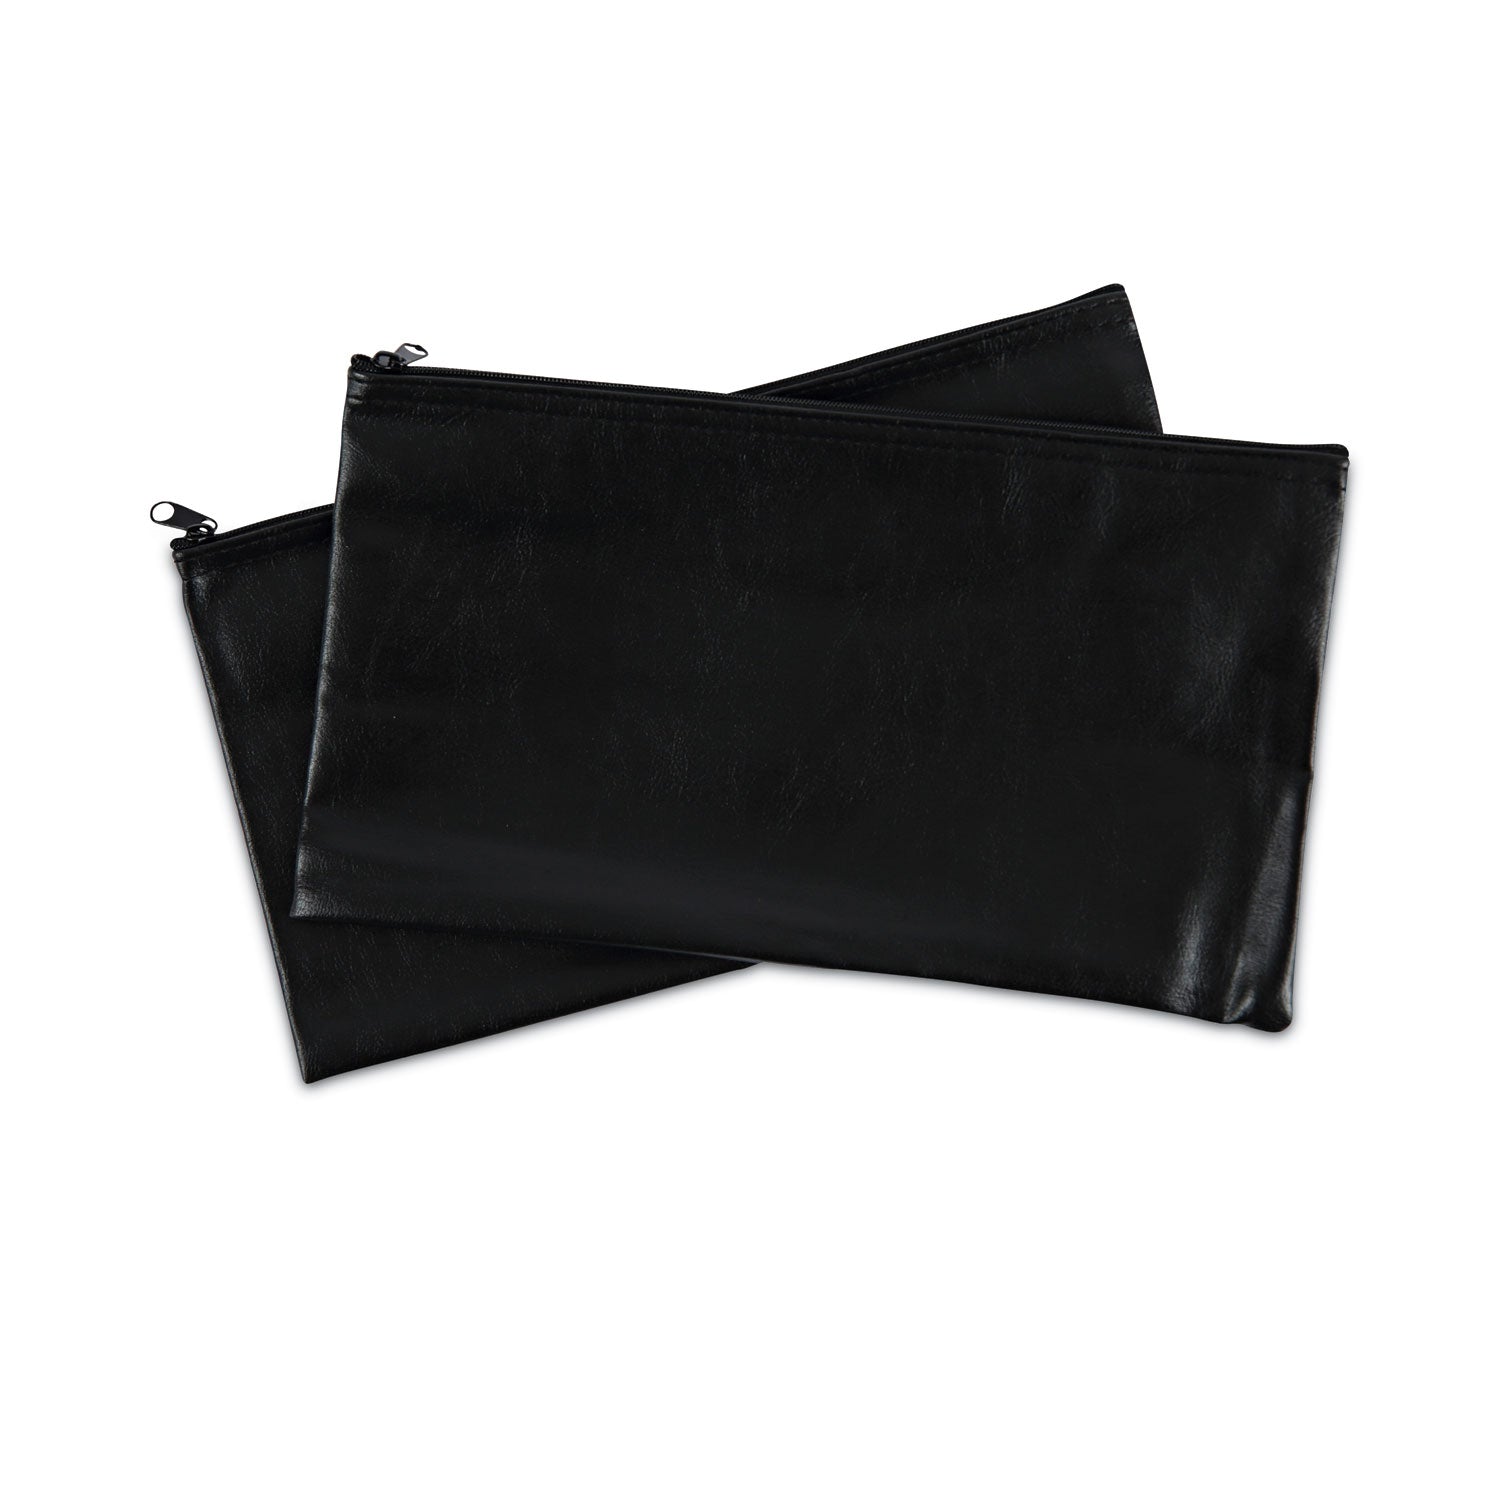 zippered-wallets-cases-leatherette-pu-11-x-6-black-2-pack_unv69021 - 8